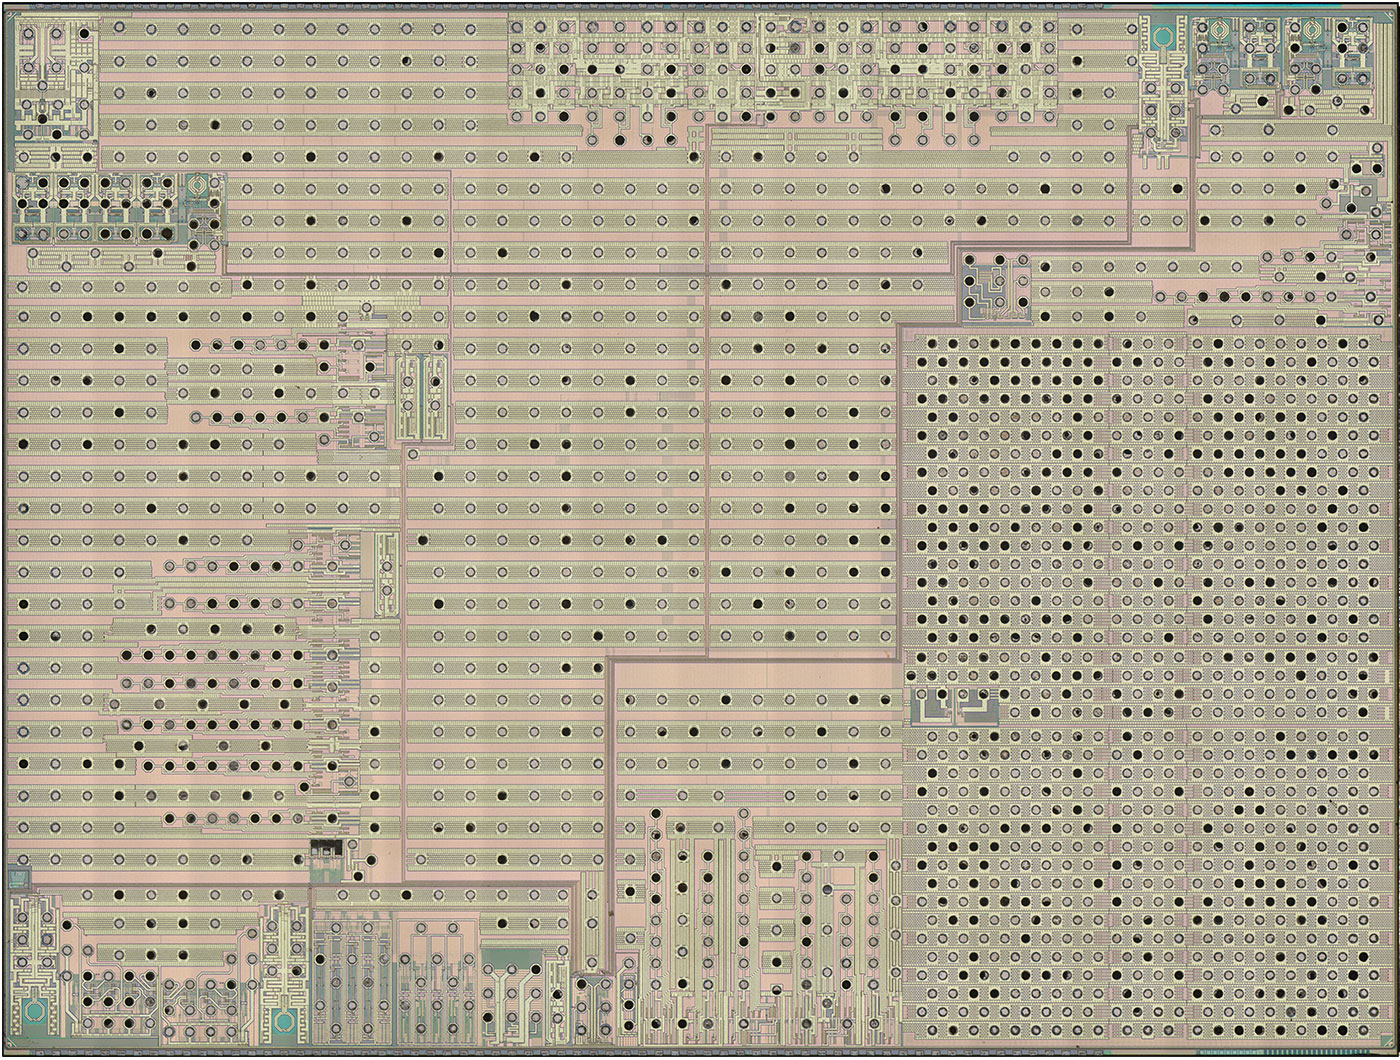 BCM2712 die shots - 2nd layer metal interconnects